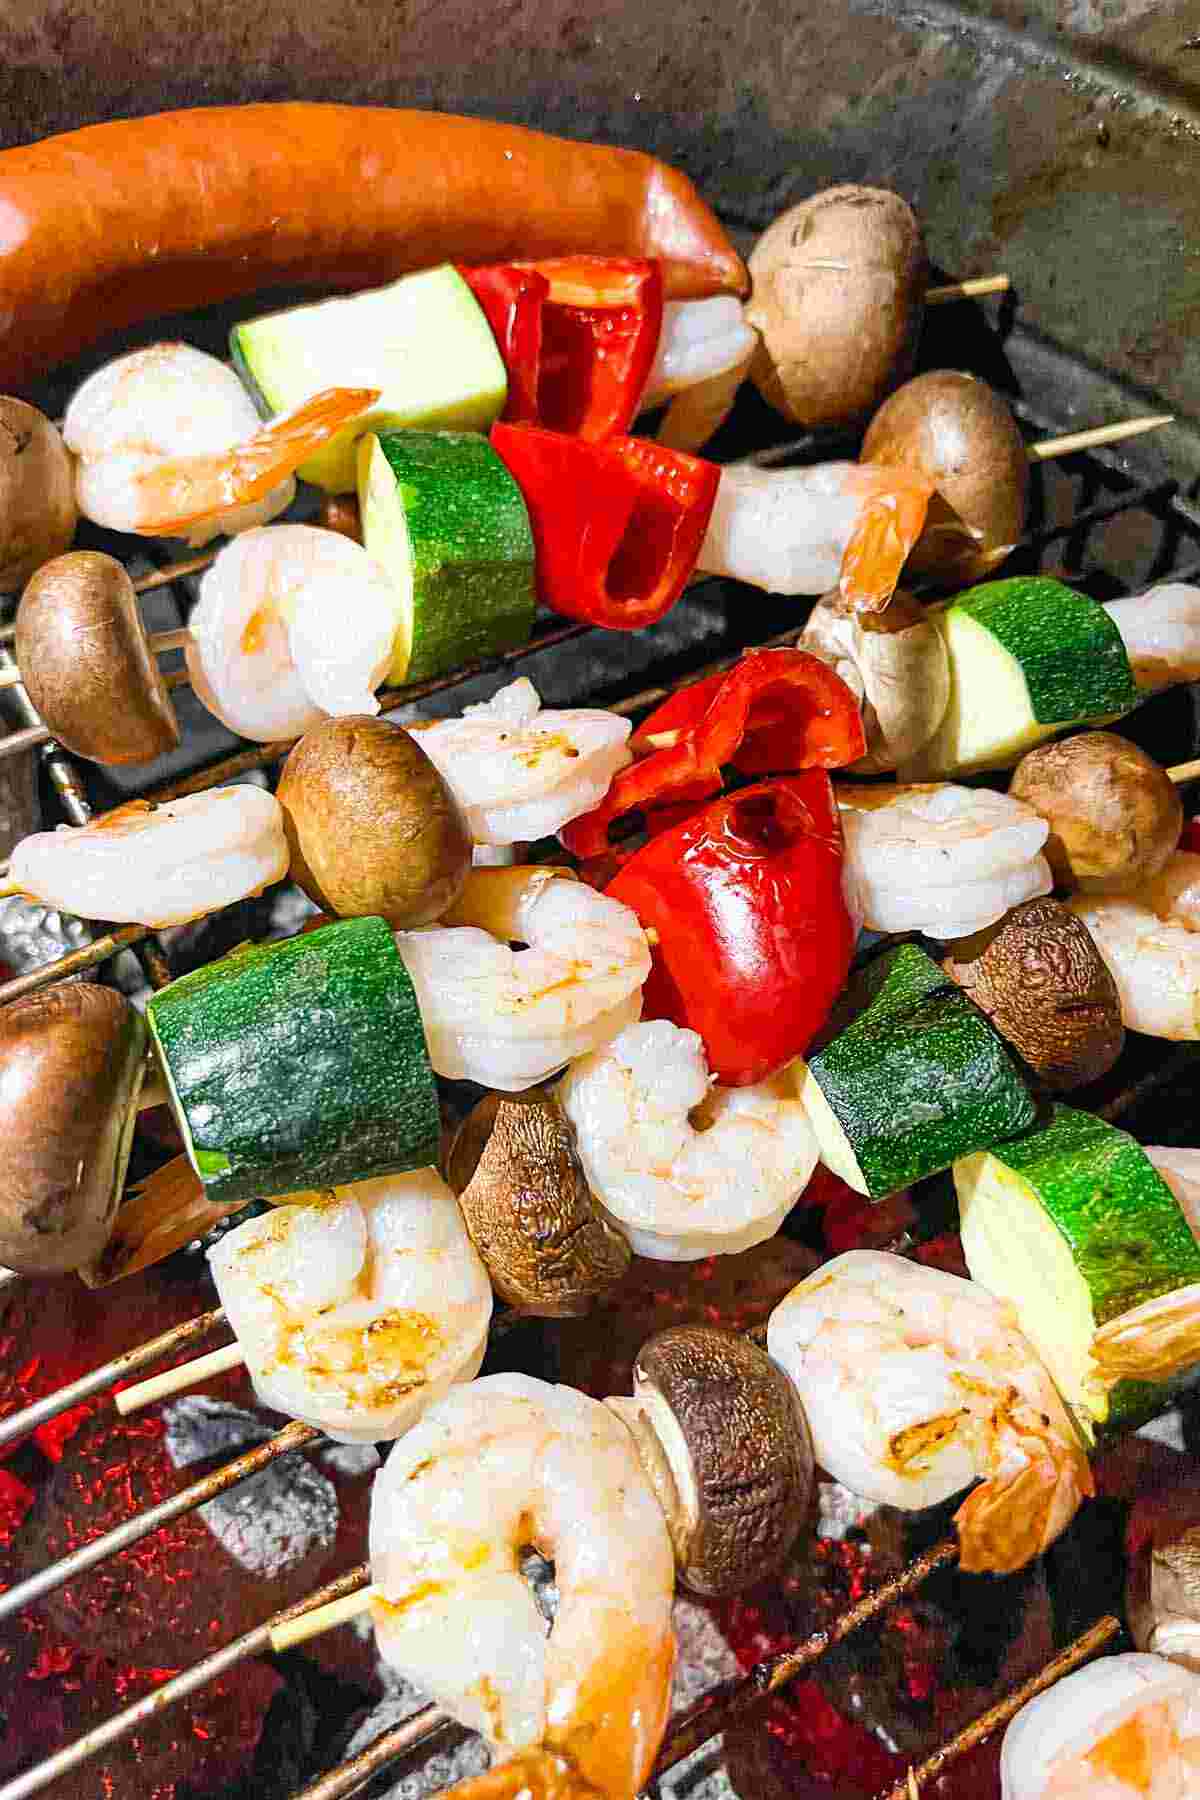 Shrimp and vegetables on skewers on a grill.